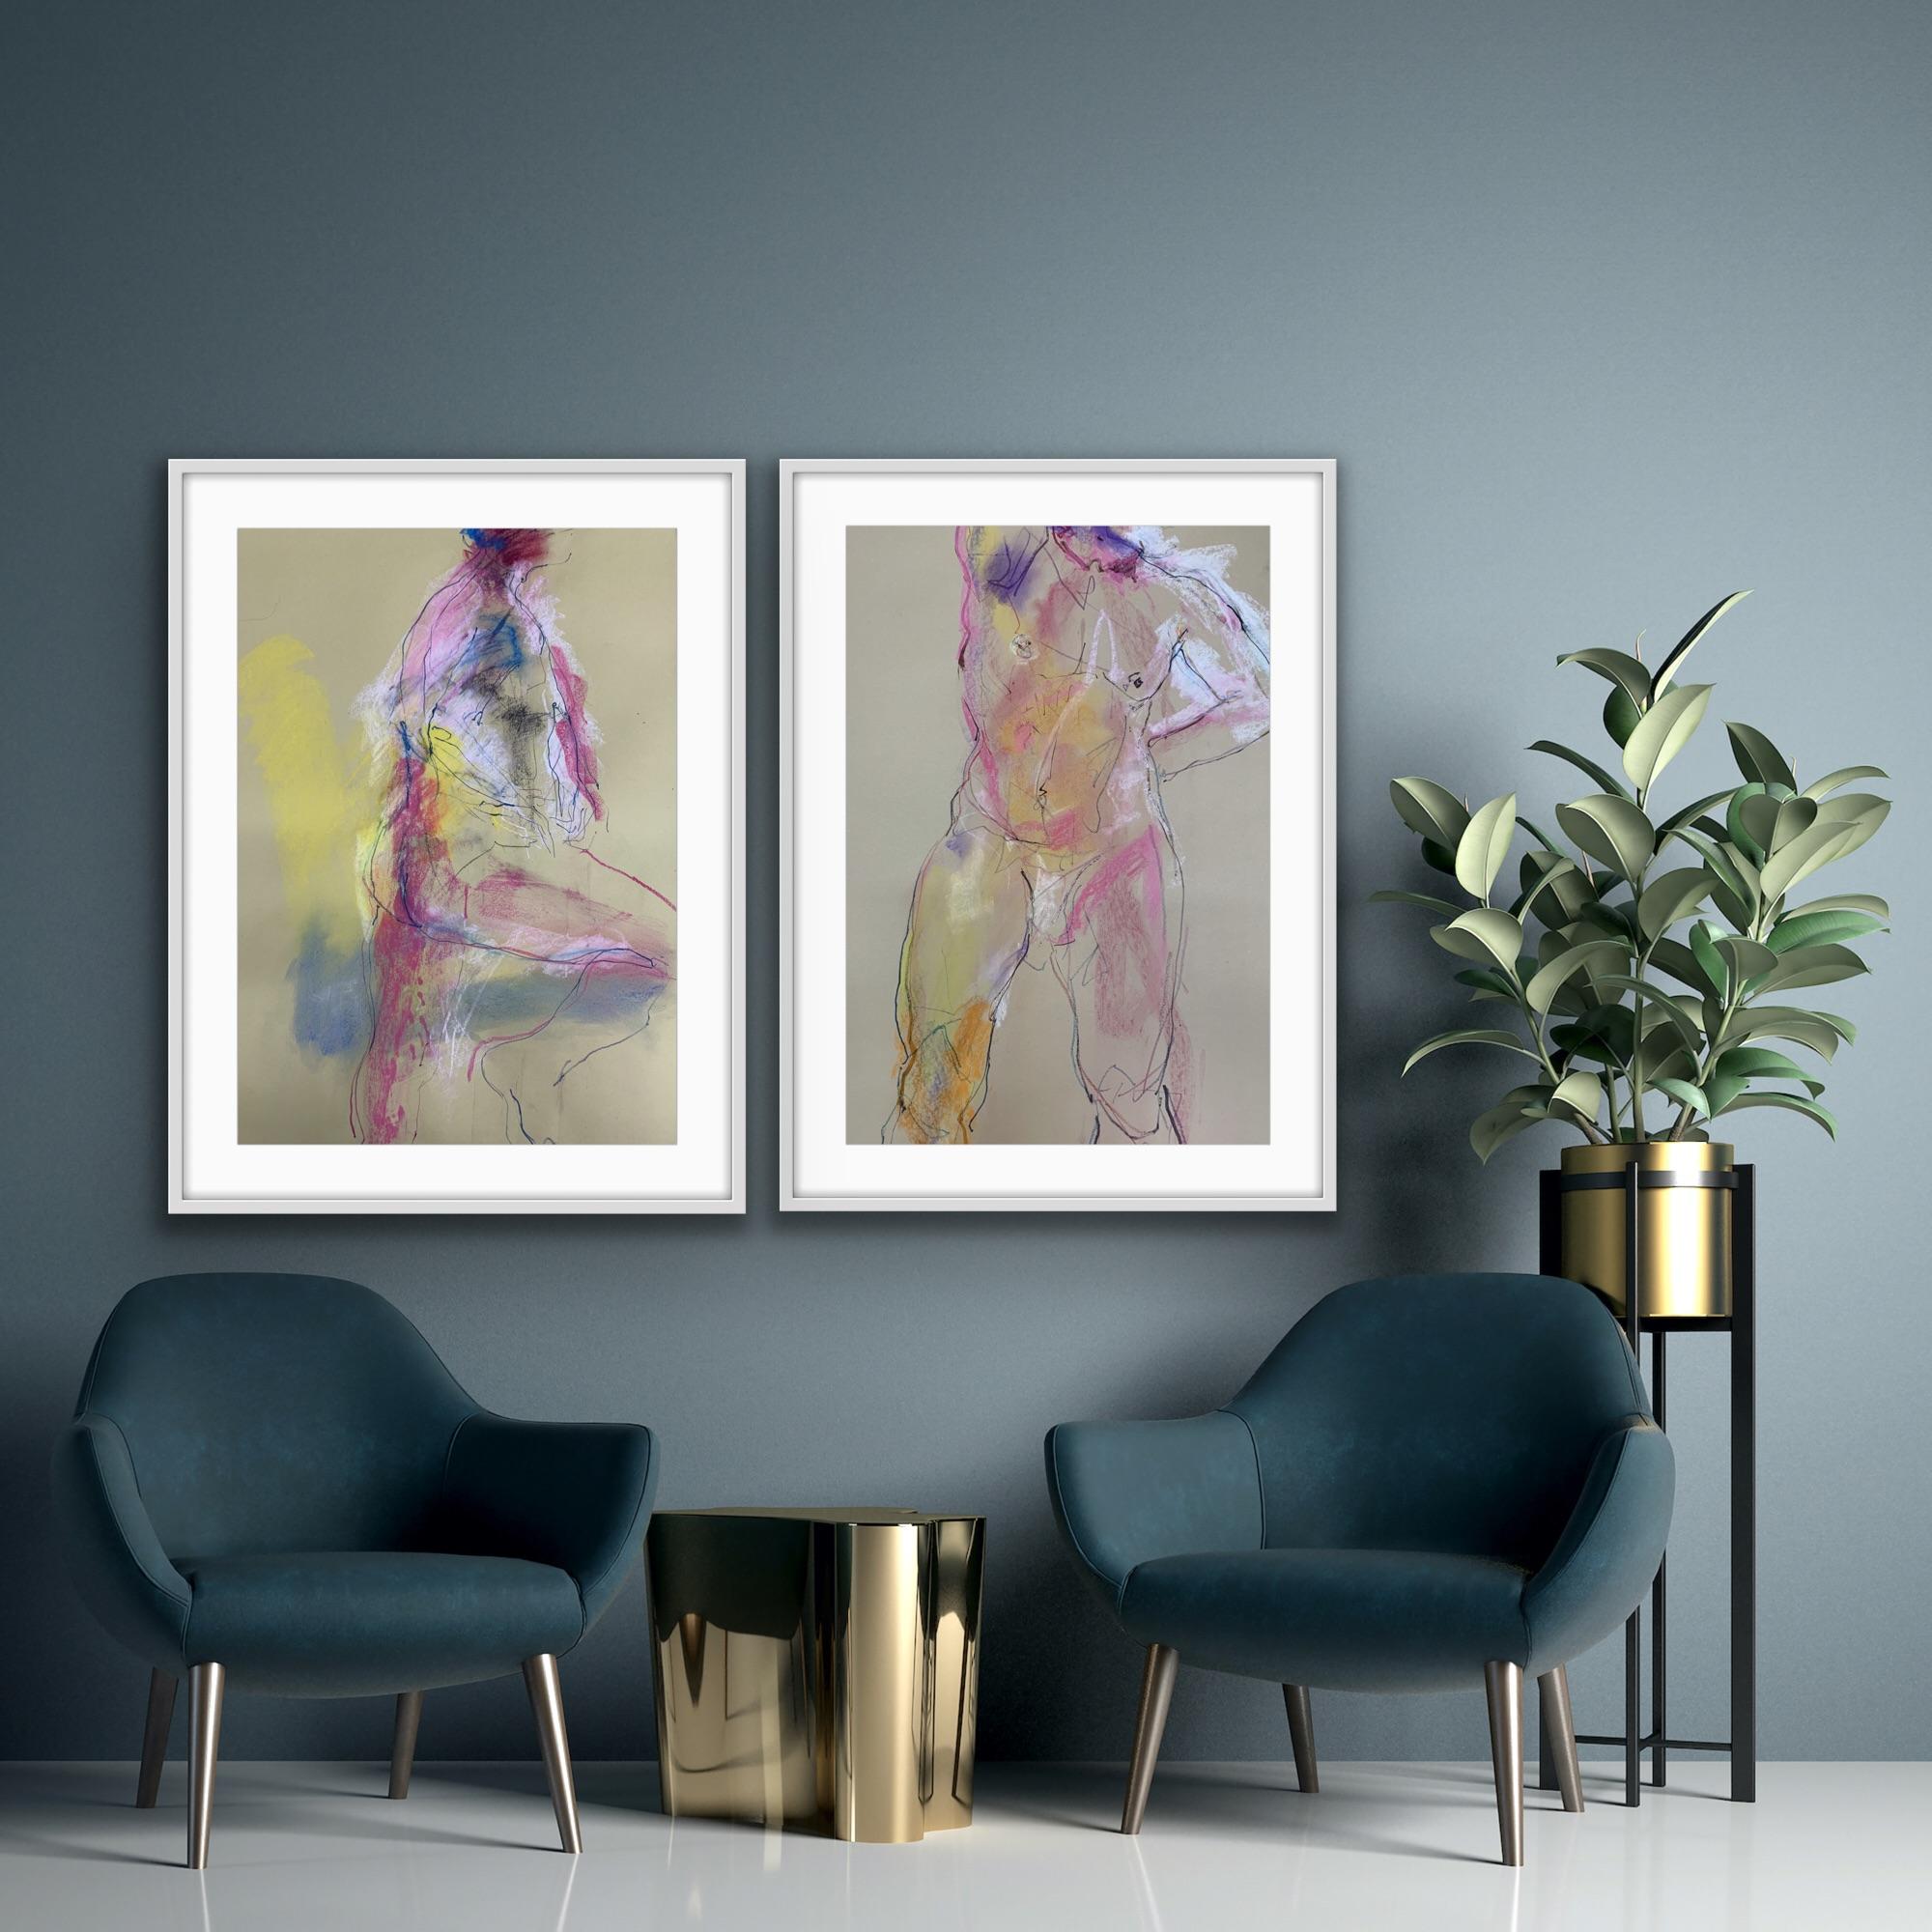 Alberto Standing 2 and 3  - Expressionist Painting by Judith Brenner